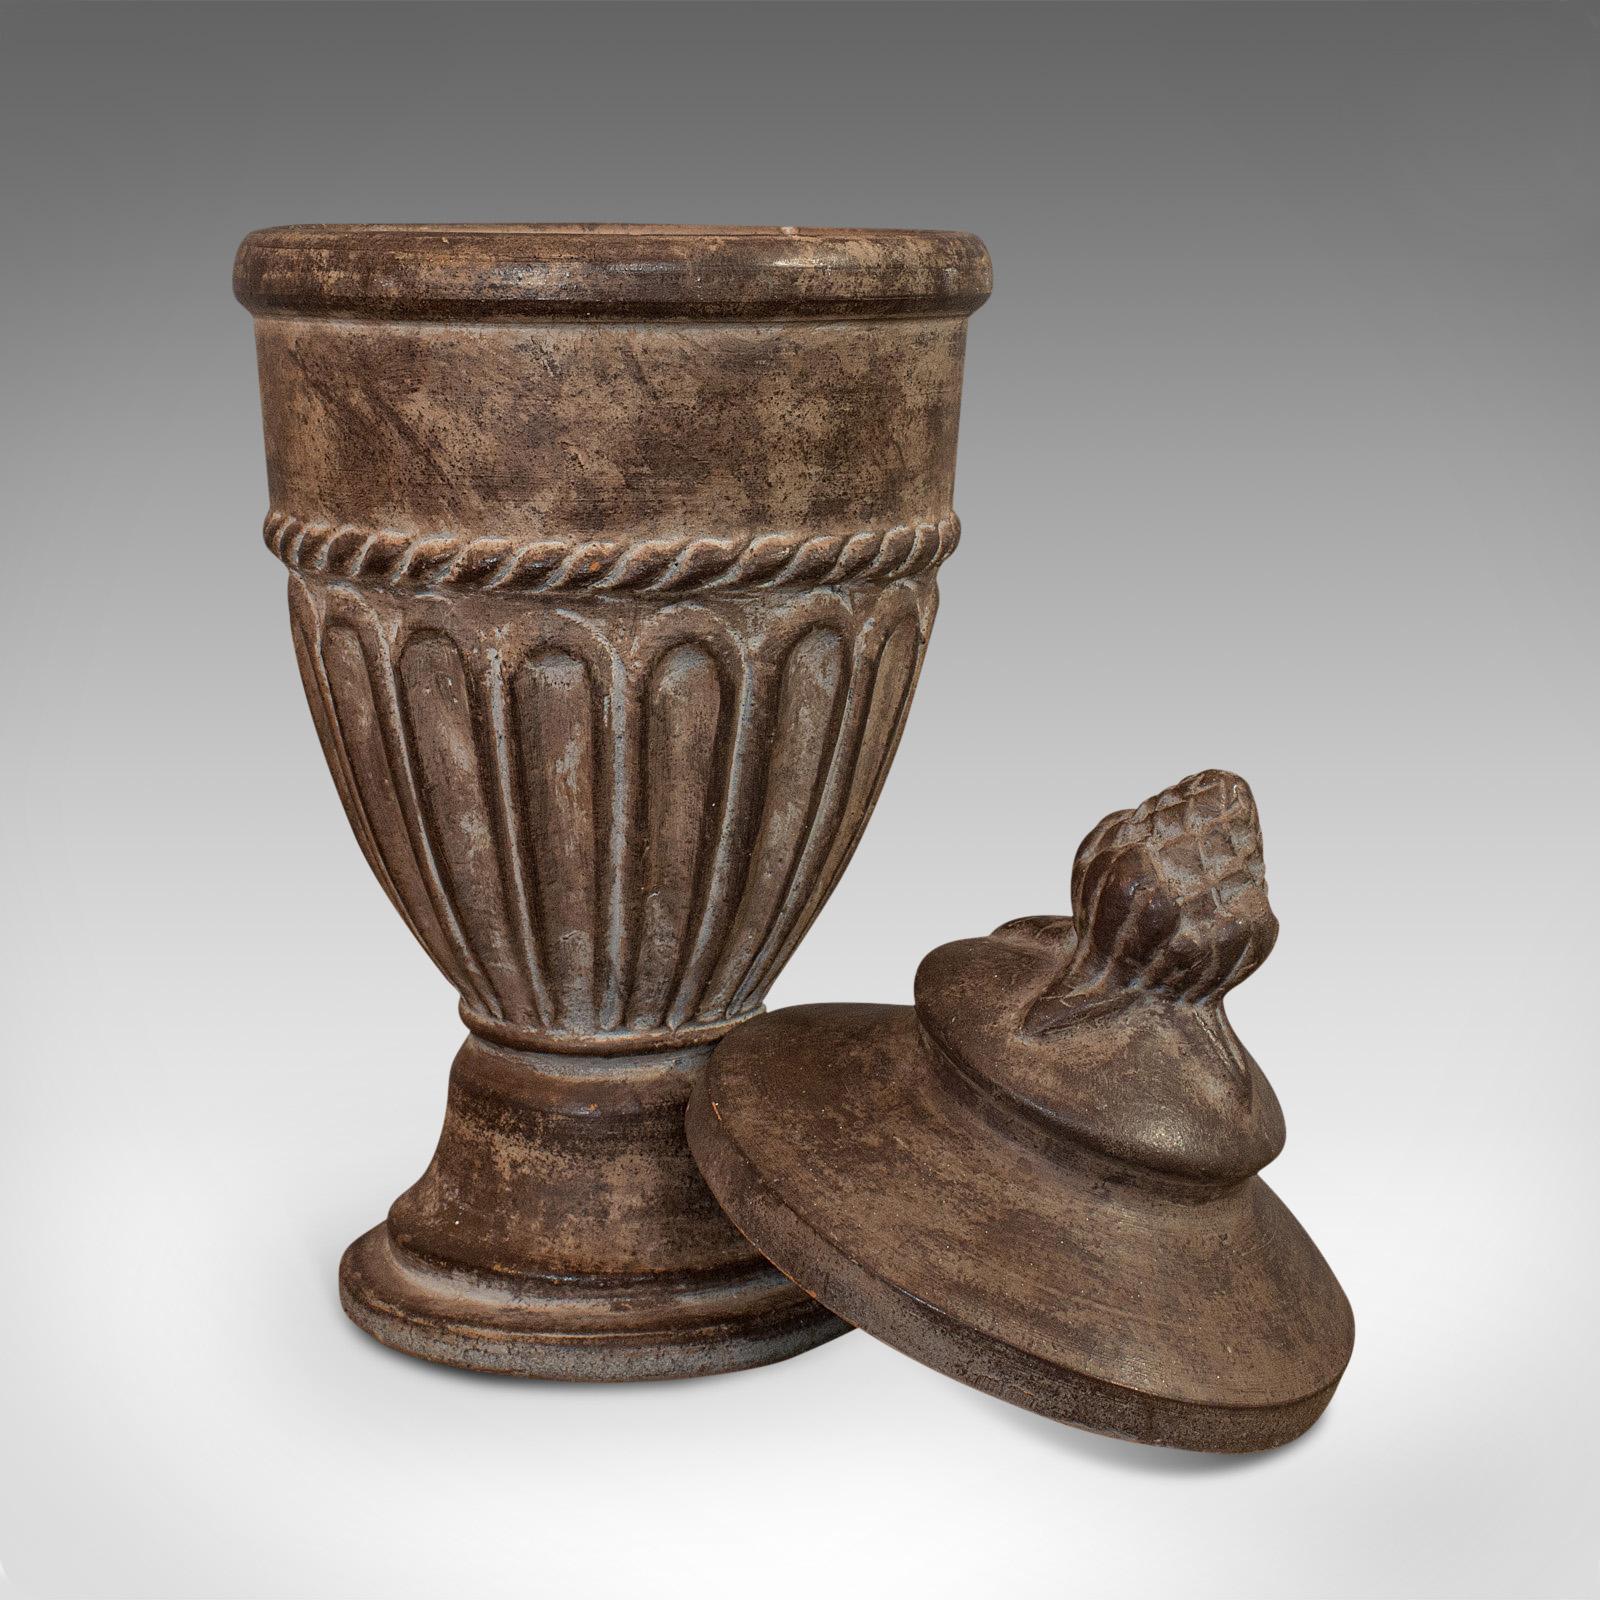 This is a vintage urn. An English, terracotta decorative garden or fireside ornament, dating to the late 20th century, circa 1980.

Appealing decorative piece with earthen hues
Displays a desirable aged patina
Thick terracotta offers a pleasing